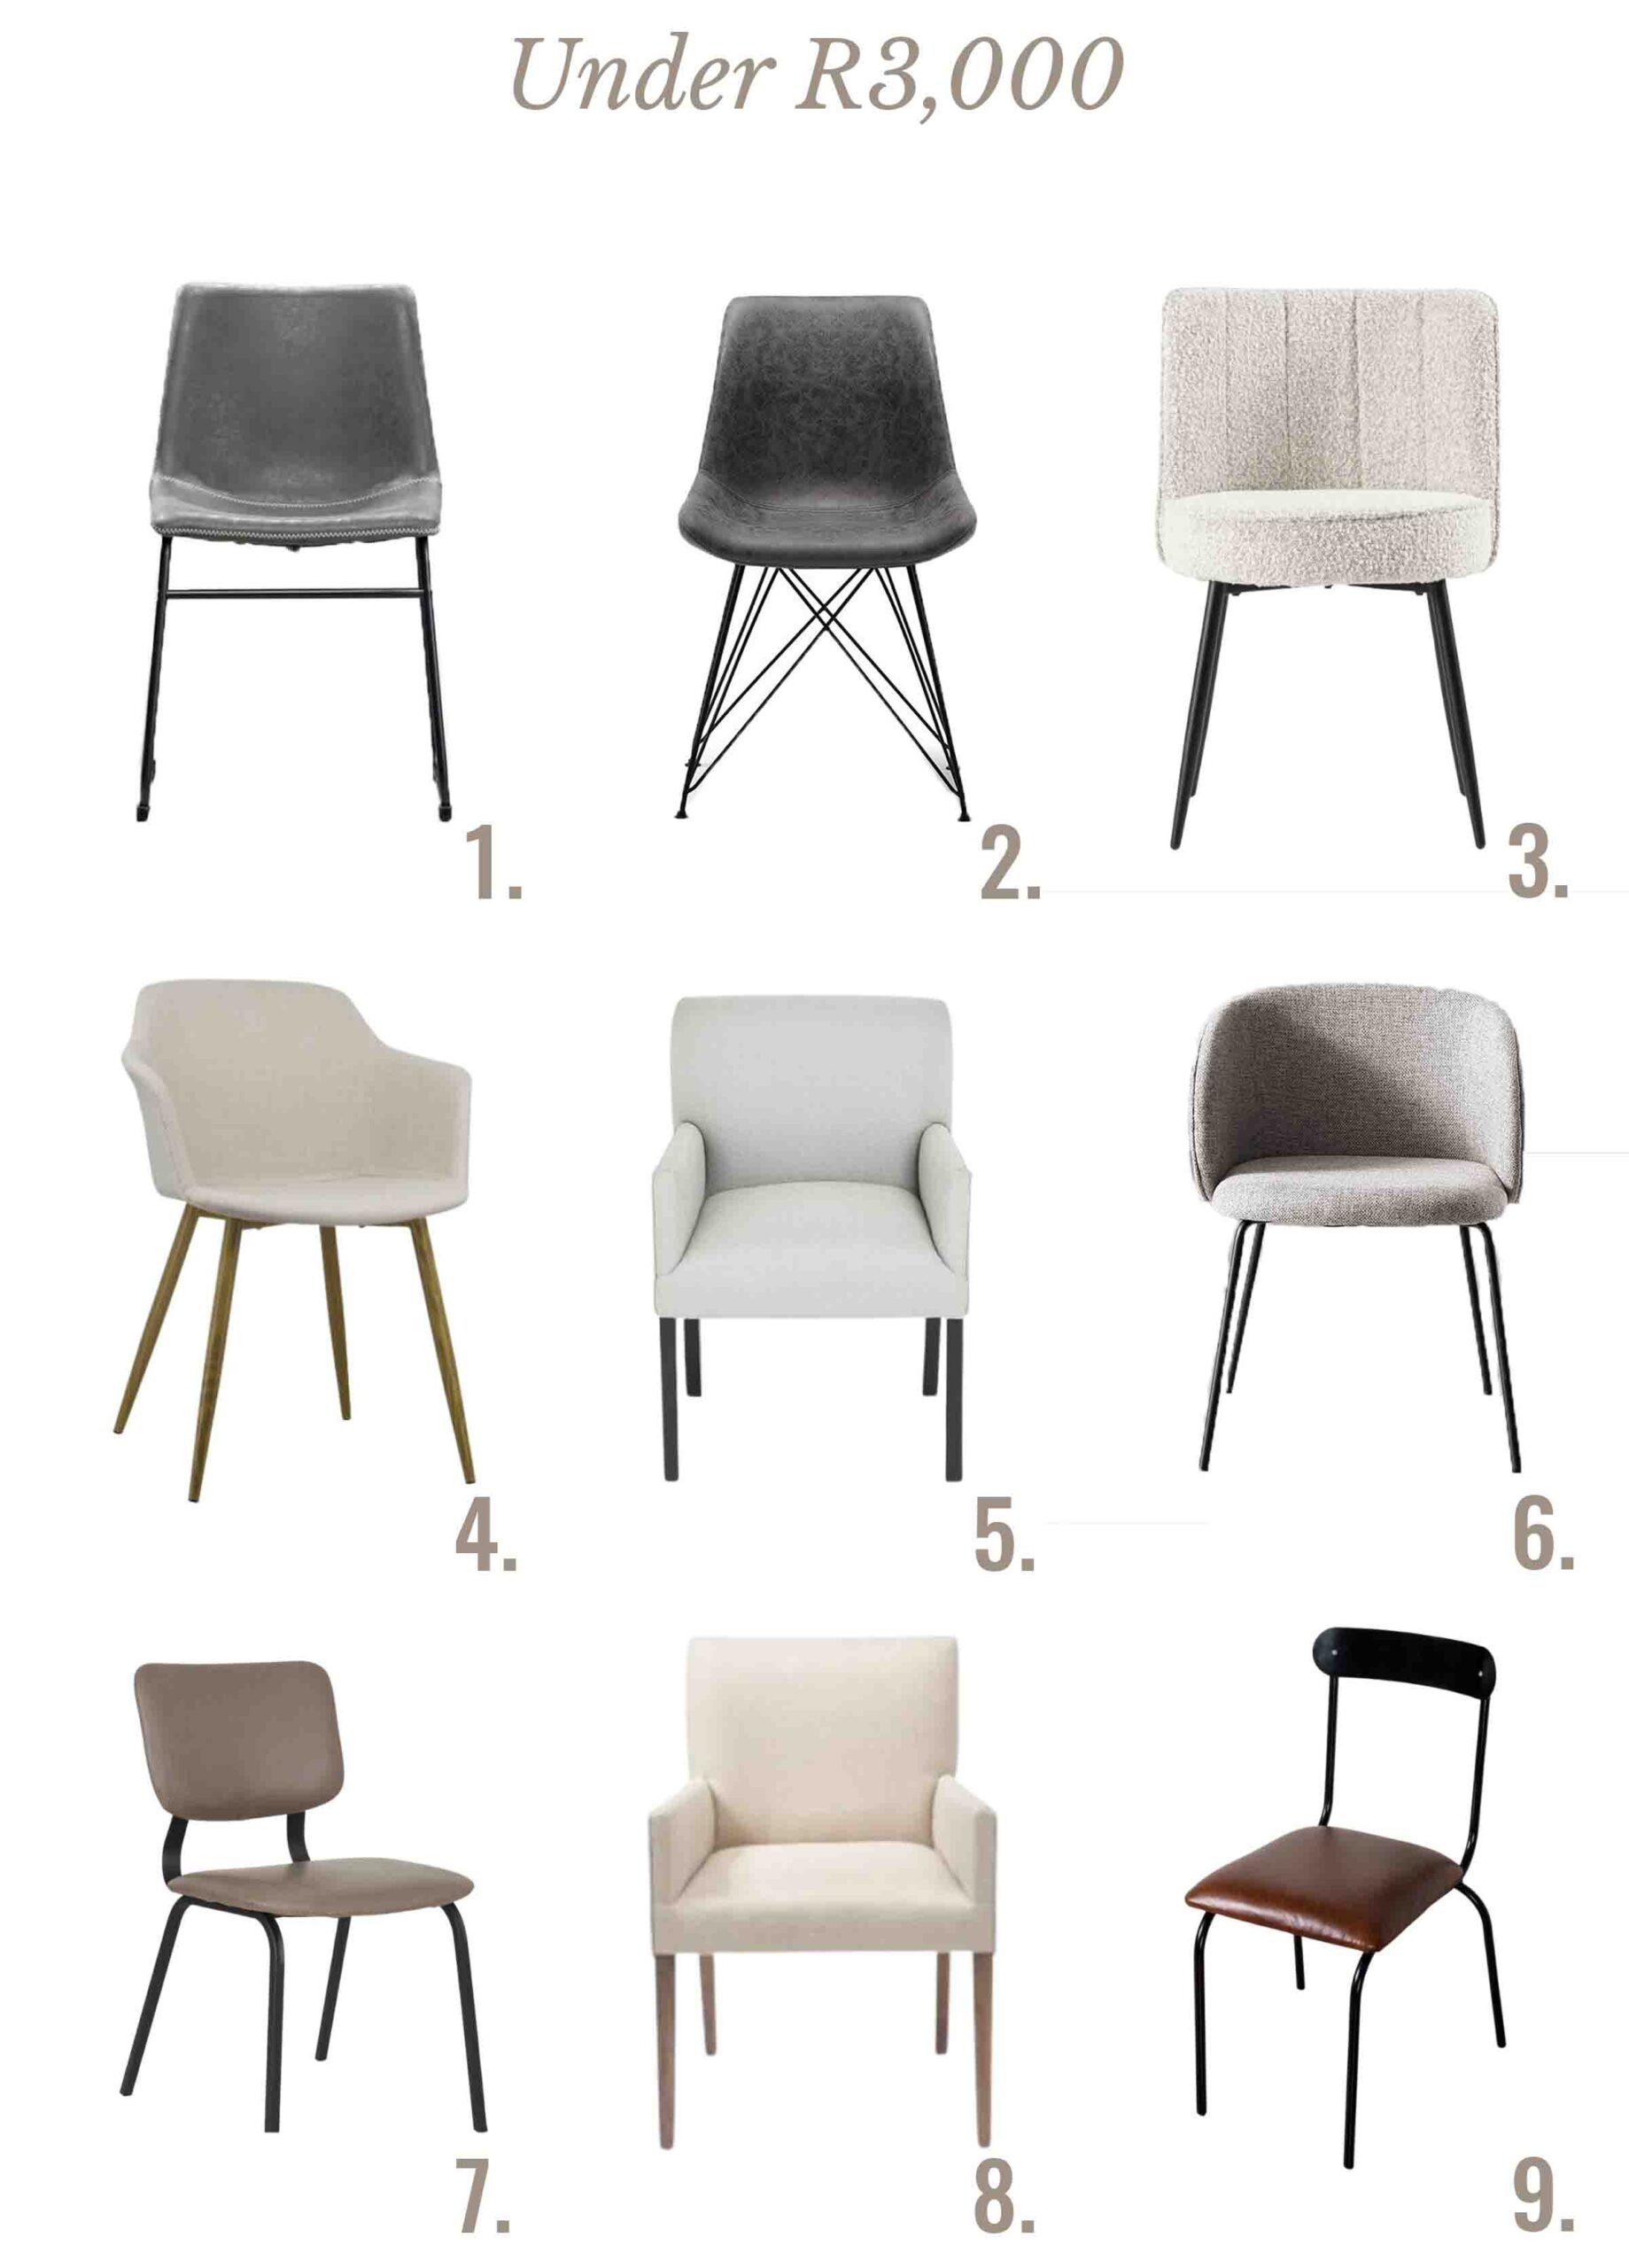 Dining Chairs Under R3000